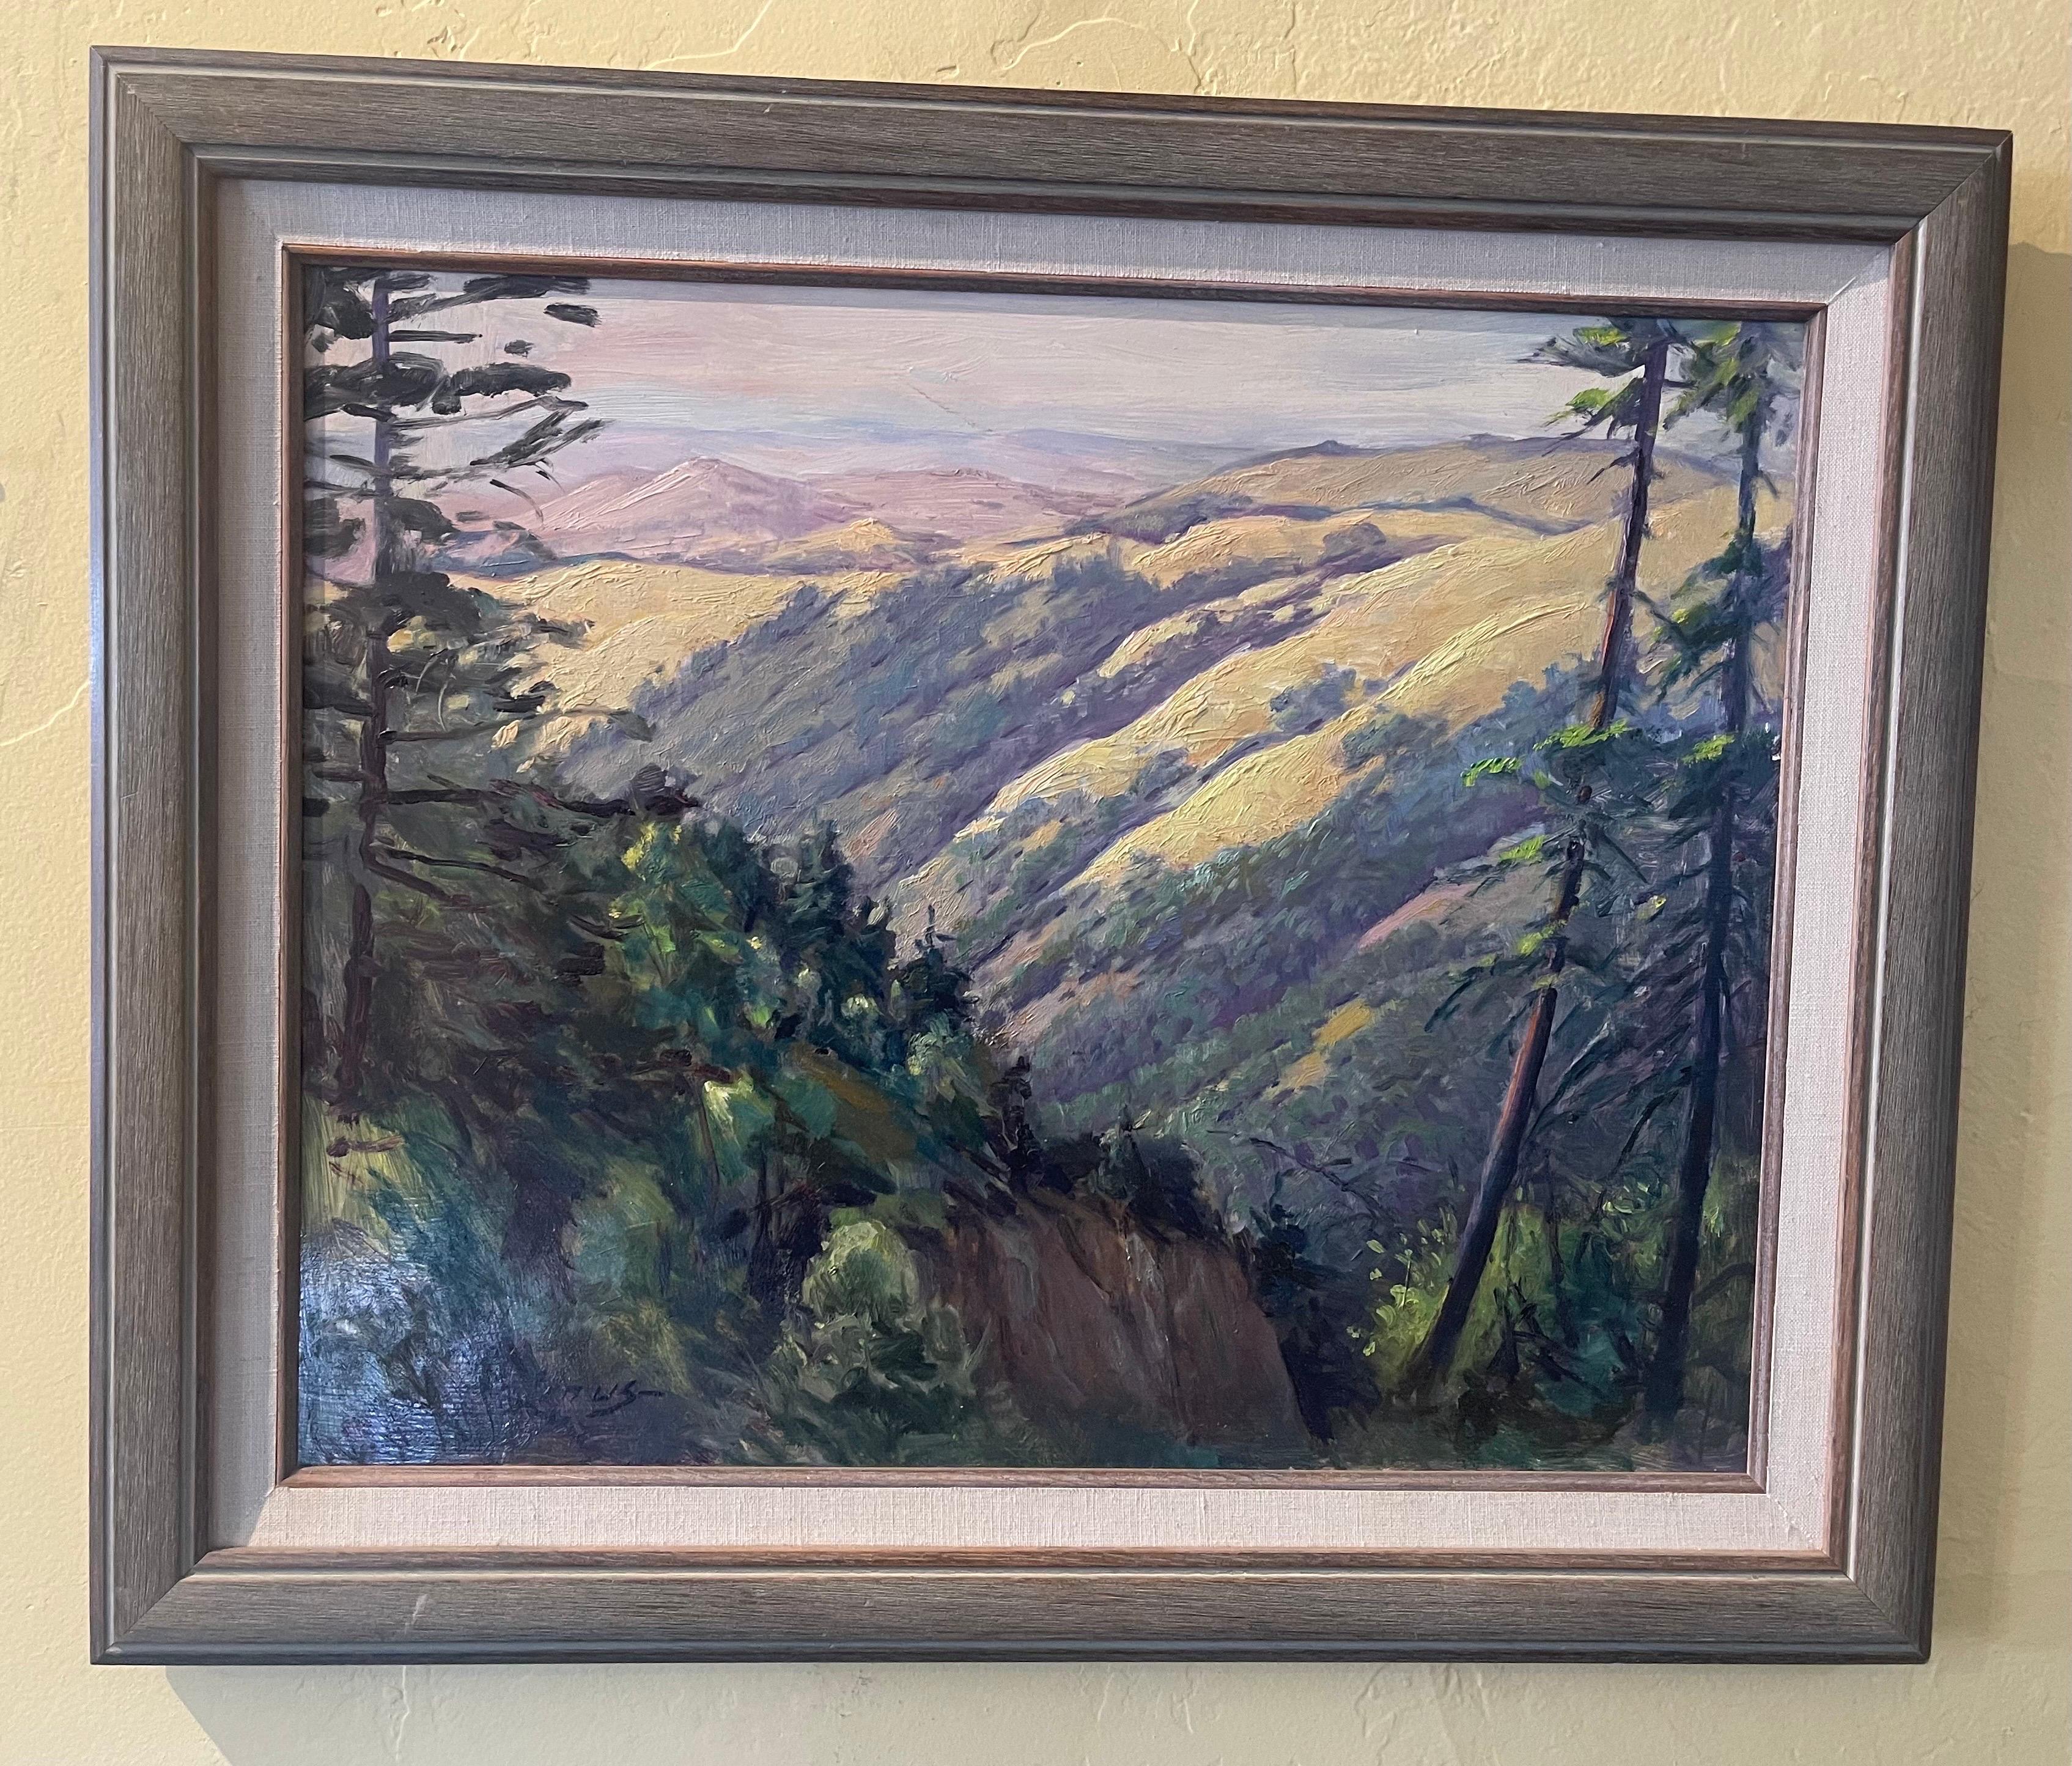 Gorgeous original oil on board southwest plein air landscape painting by listed artist Axel Linus, circa 1960s. This wonderful piece measures 24.5 x 20.5 framed and the painting itself is 19.75